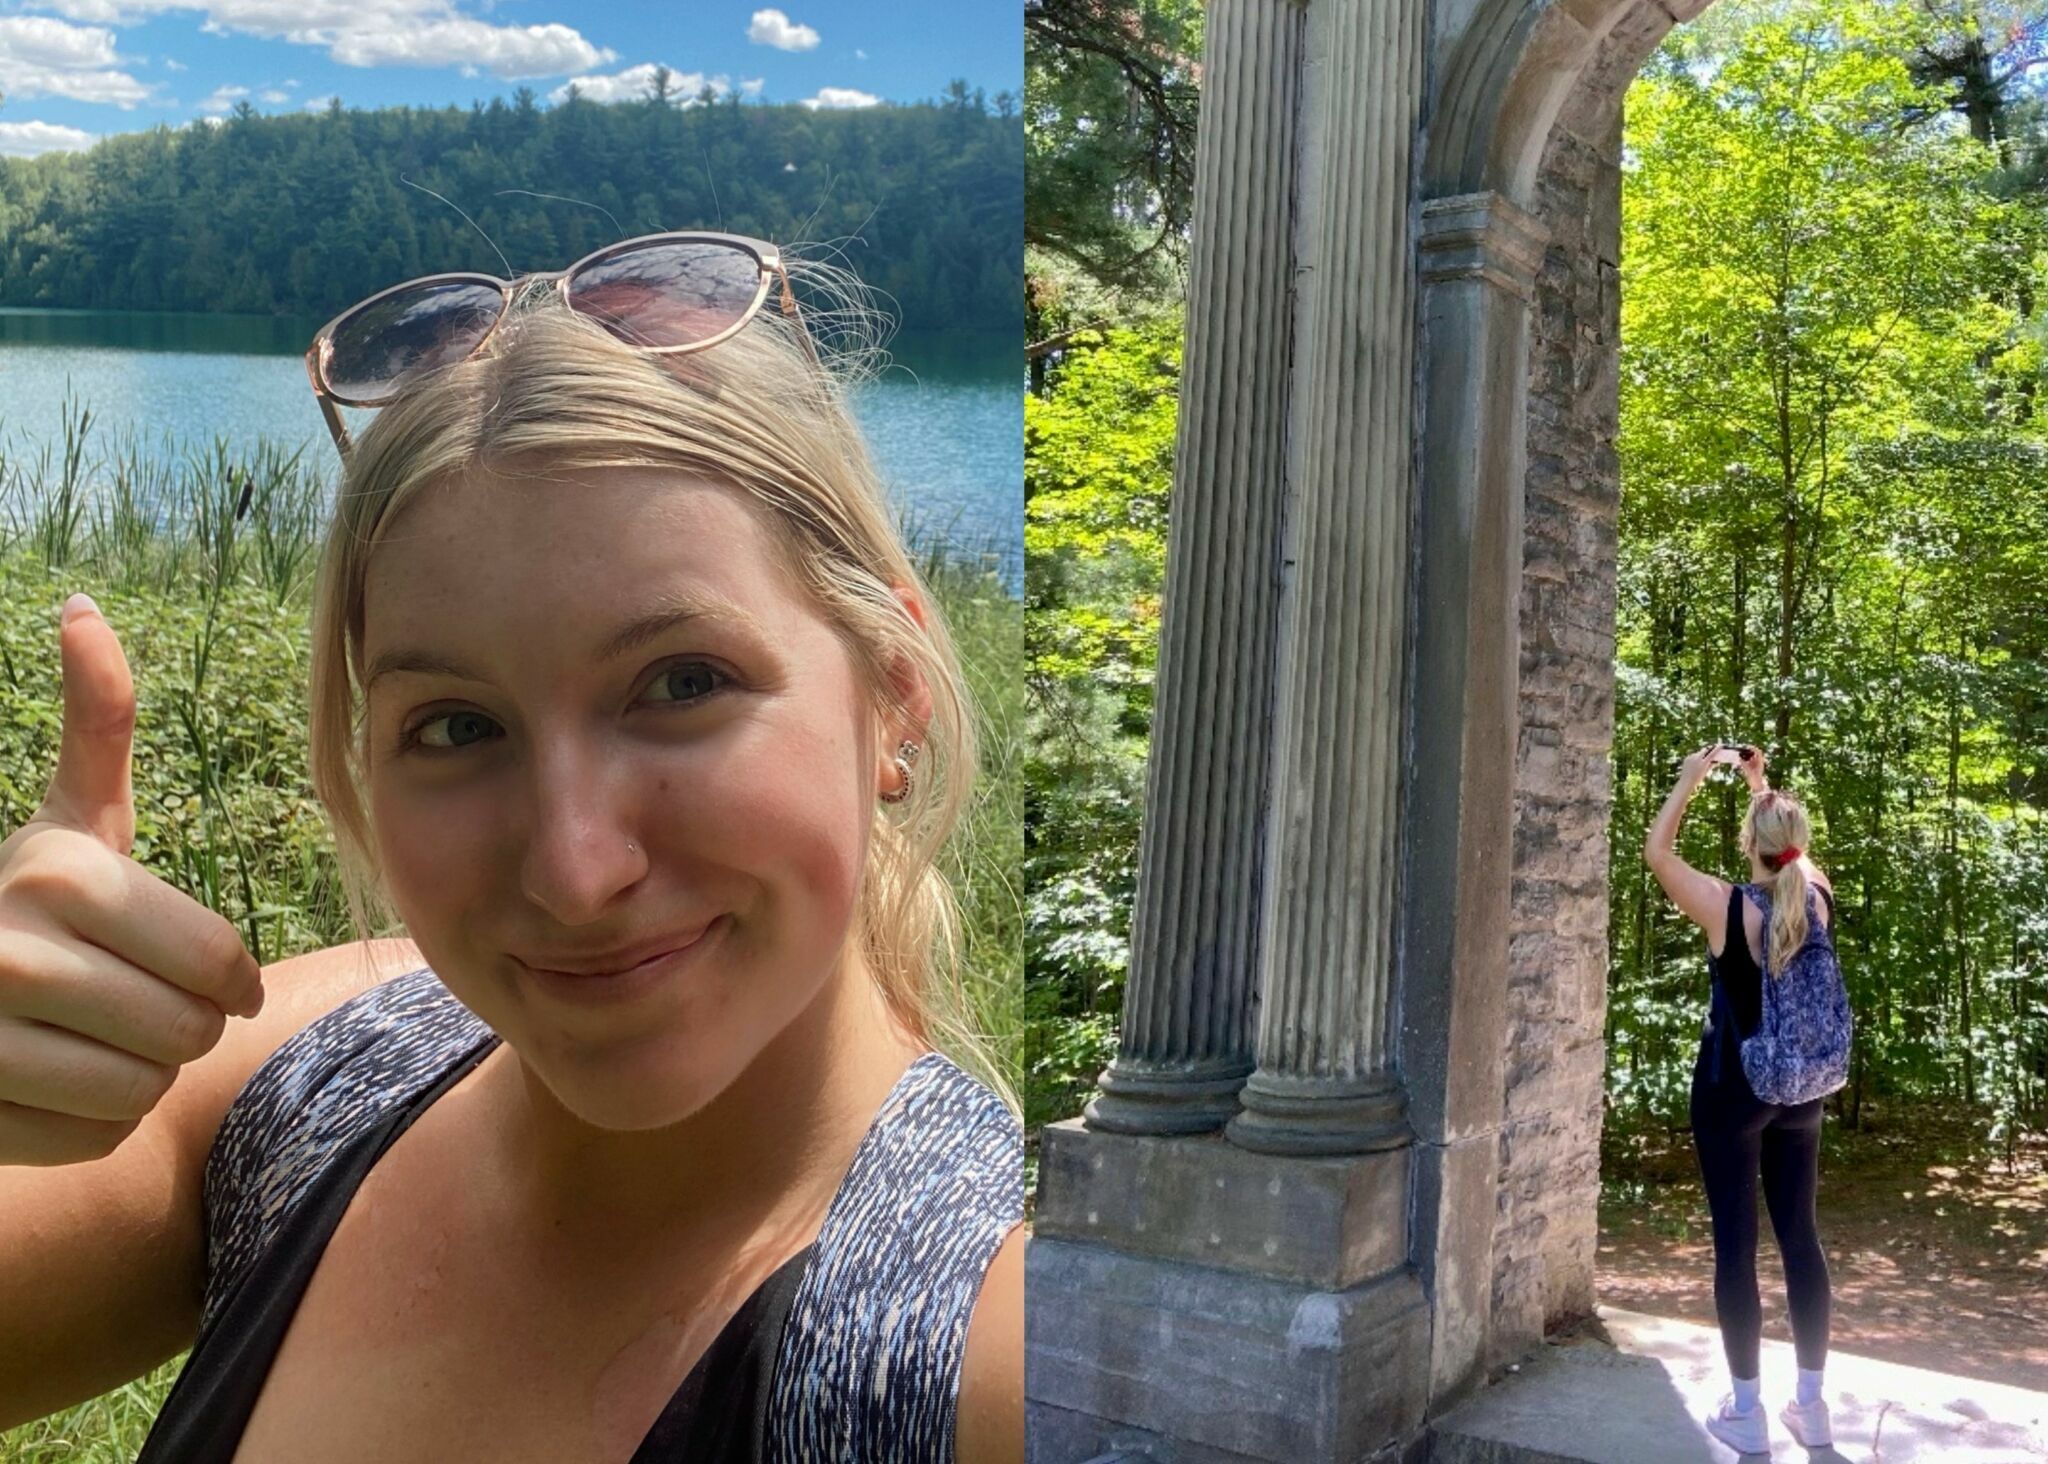 Left: Self-portrait of Lauren Filletti. Right: Lauren taking a picture of the ruins on Mackenzie King Estate grounds.